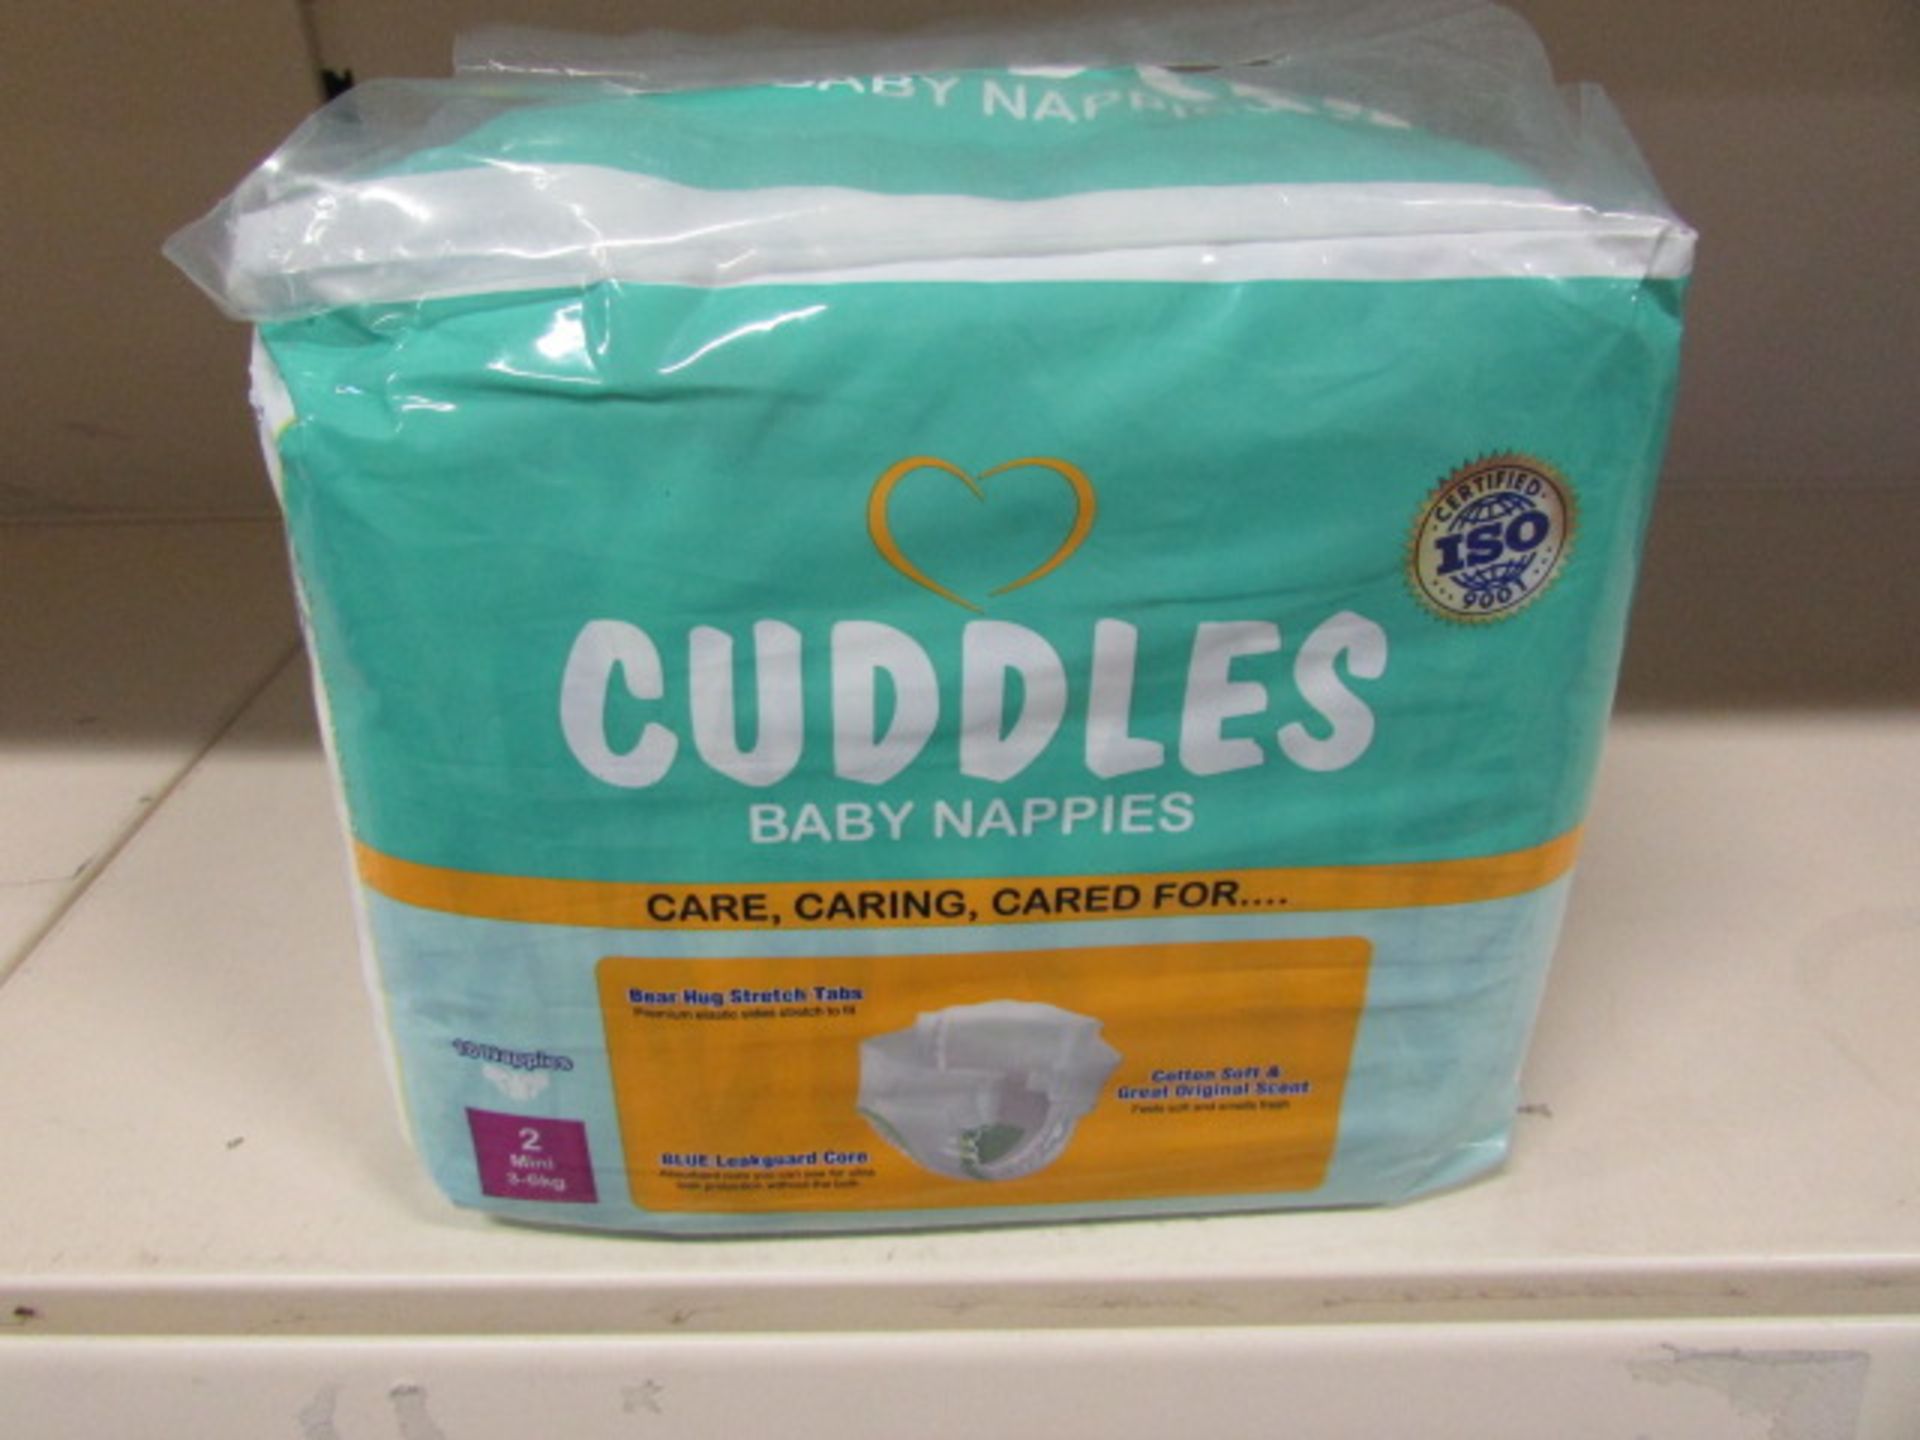 1 x Outer Carton, 10 Packs In An Outer, 18 Nappies in A Pack (180 Nappies In Total) [Size 2] - Image 4 of 6